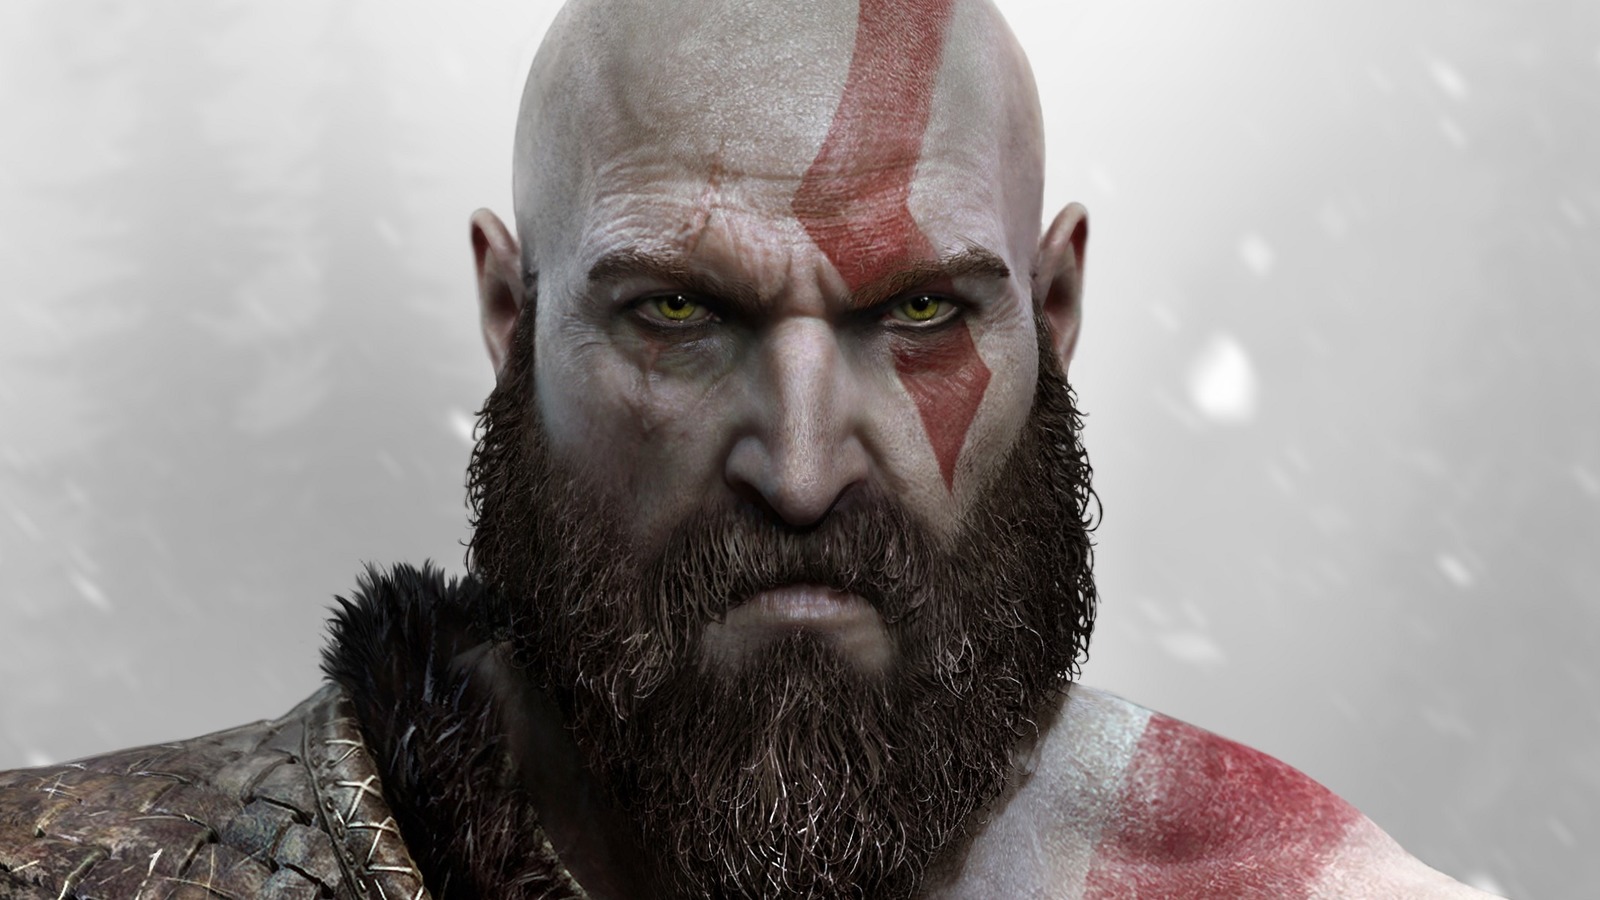 God of War Fans Page - Zeus or Thor?!